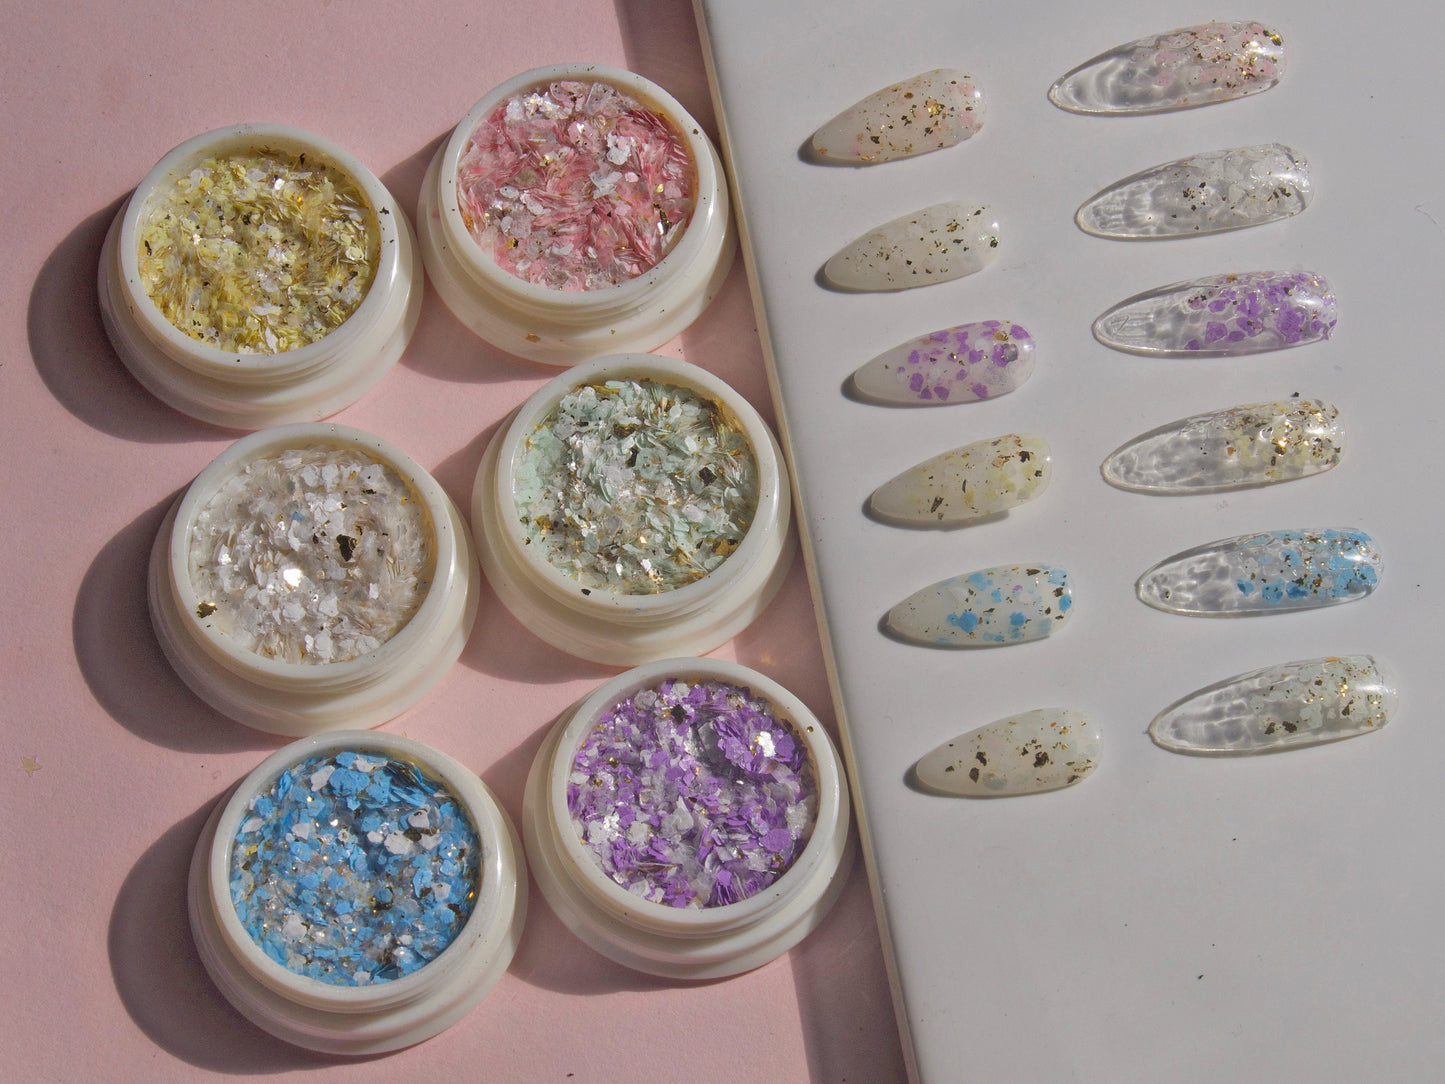 Pastel Colors Super Soft Flakes/ Cotton candy Irregular Flashy Gold Foils Chips/ Muted Hue Nail design Glitter supply/ Mixed nail glitters